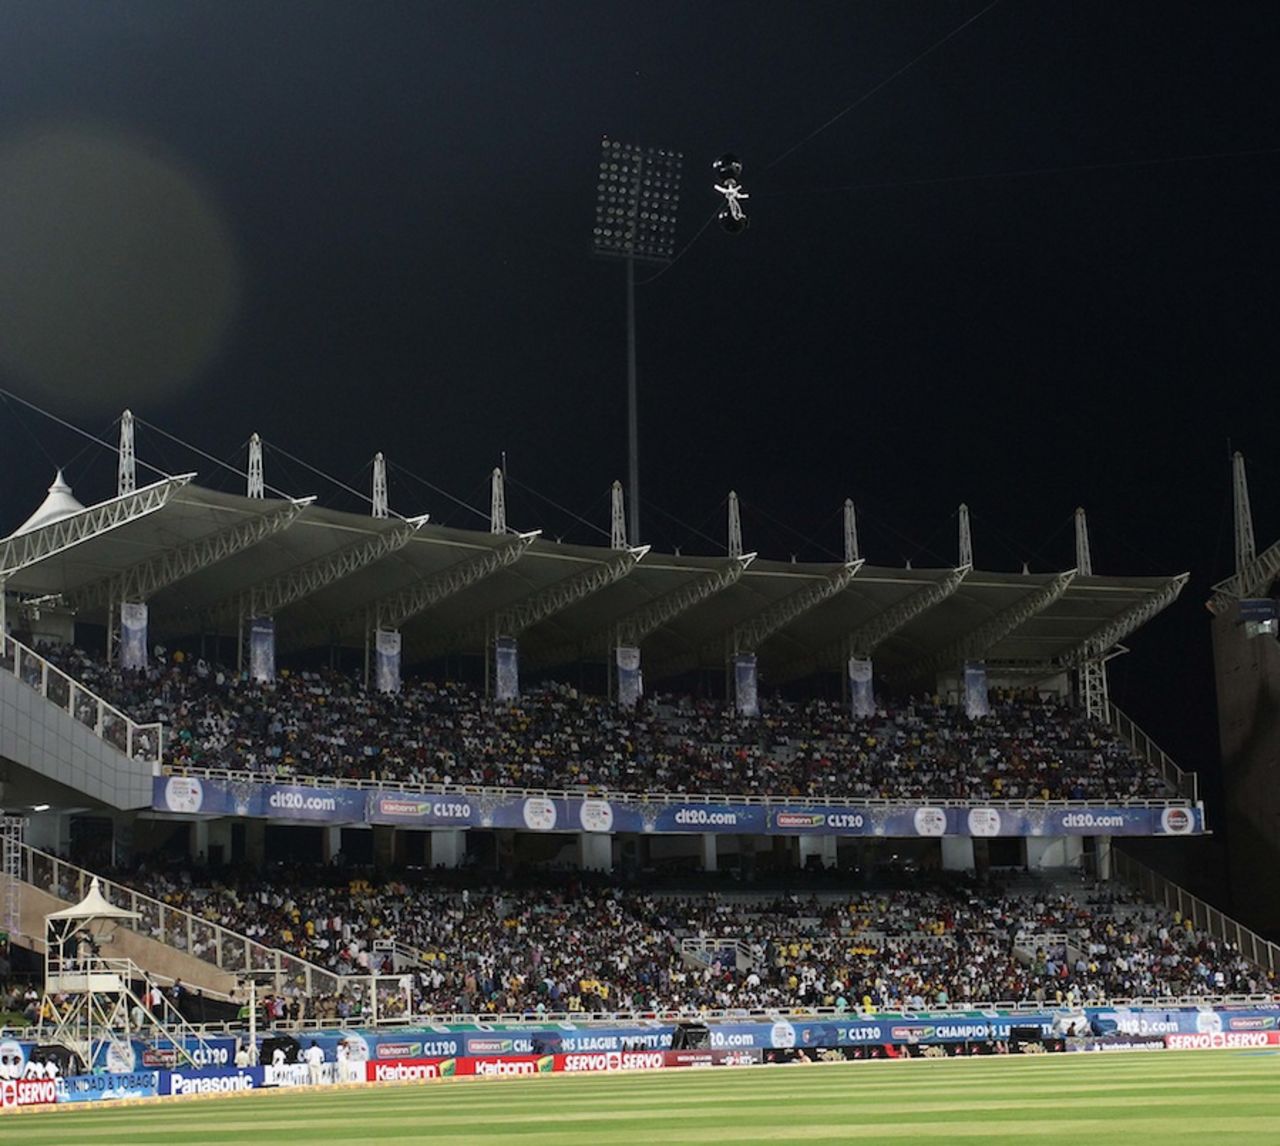 The match was halted for a bit when one of the floodlight towers malfunctioned, Brisbane Heat v Trinidad & Tobago, Champions League 2013, Group B, Ranchi, September 22, 2013